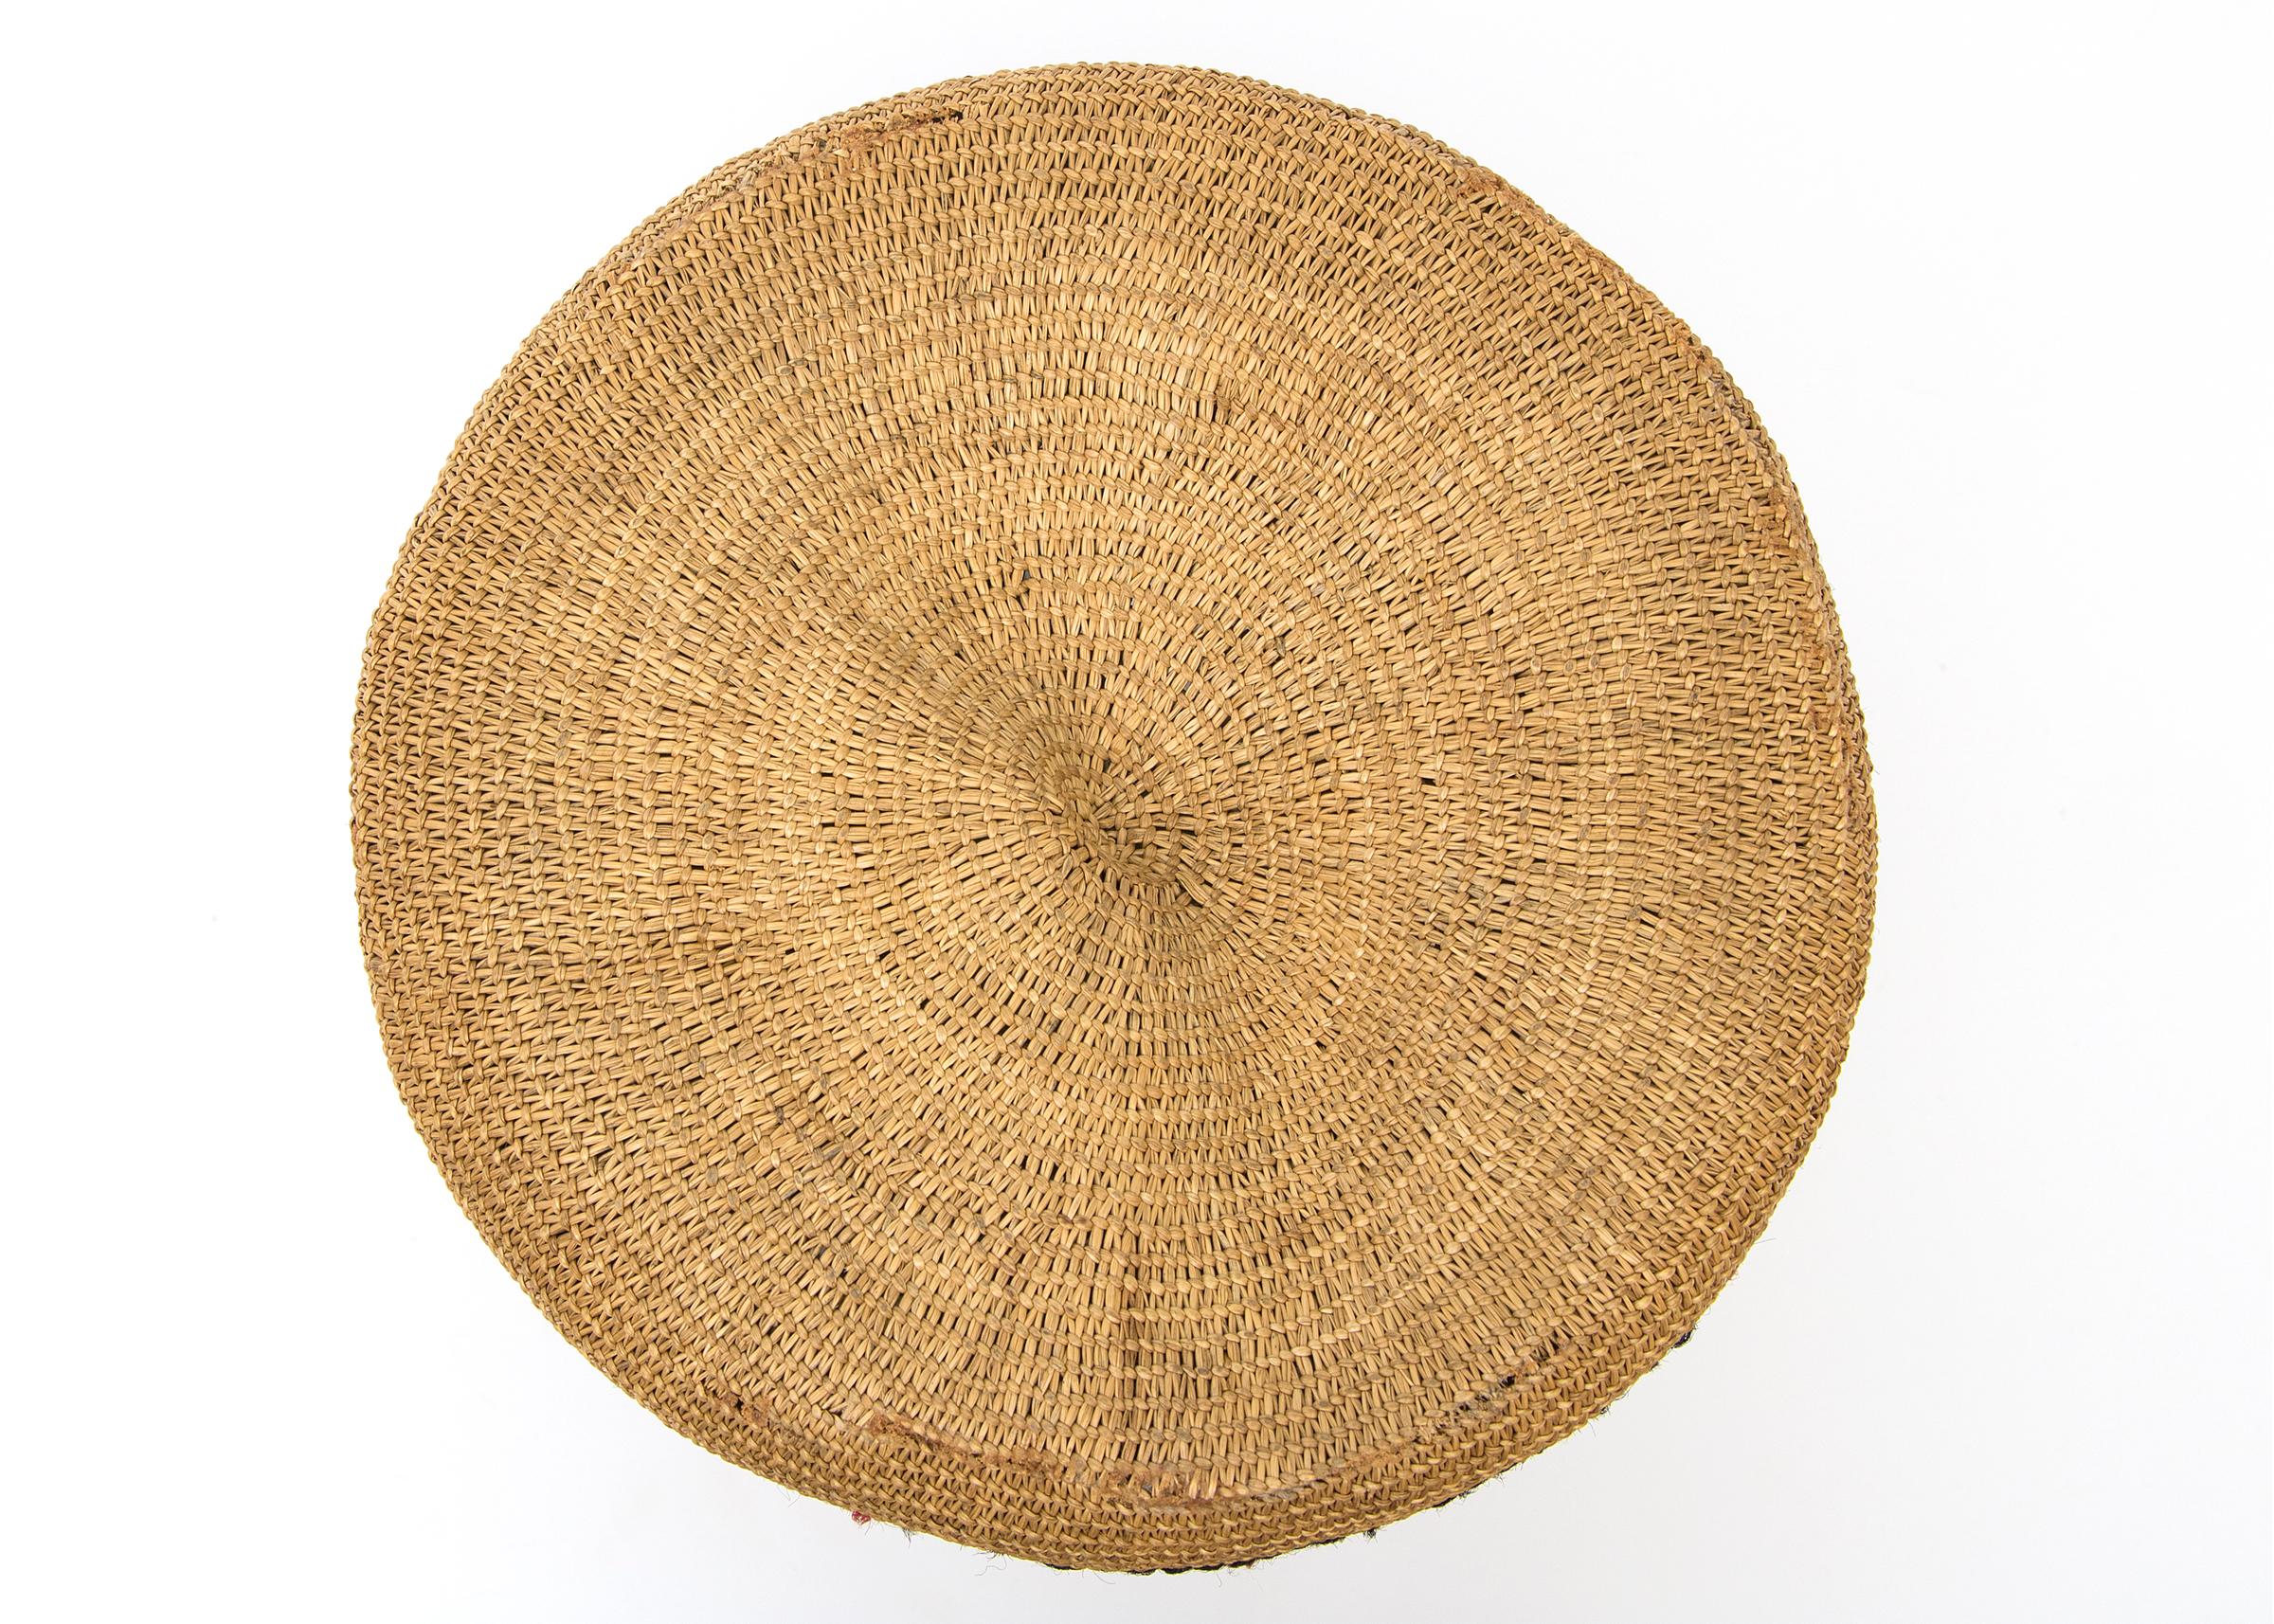 Northwest Coast 1900 Woven Basket with Top, Multicolor Cross Patterns, Table Top For Sale 1